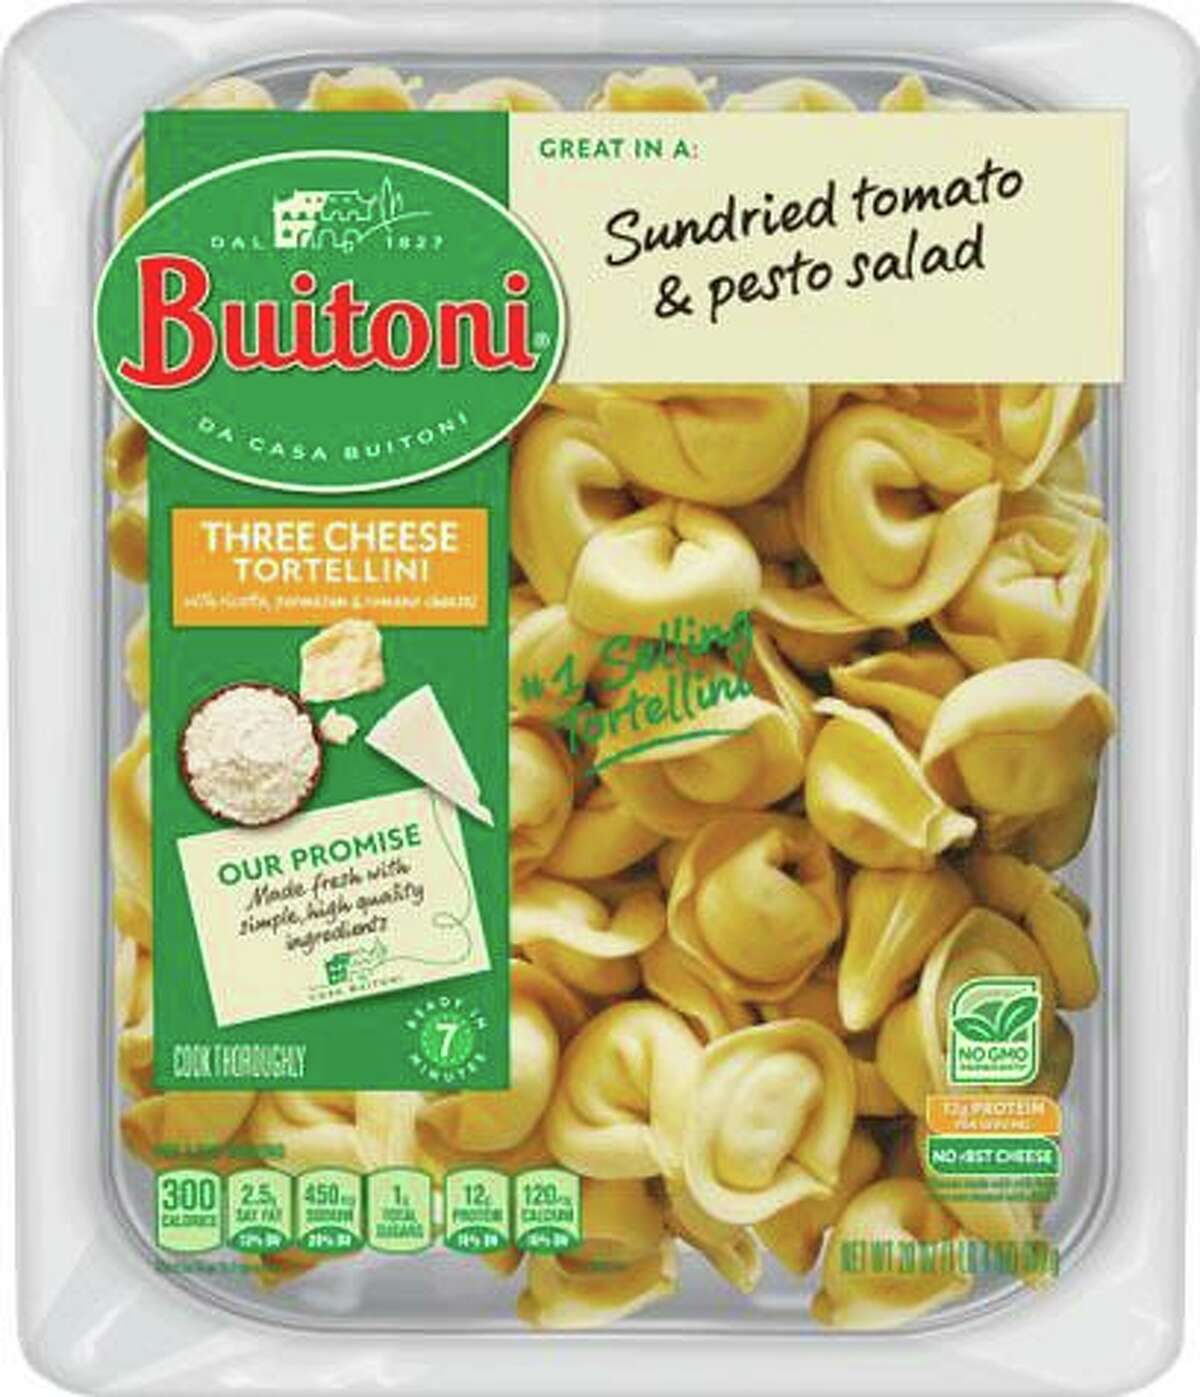 Greenwich-based private equity firm Brynwood Partners has agreed to acquire the Buitoni pasta brand’s North American business.